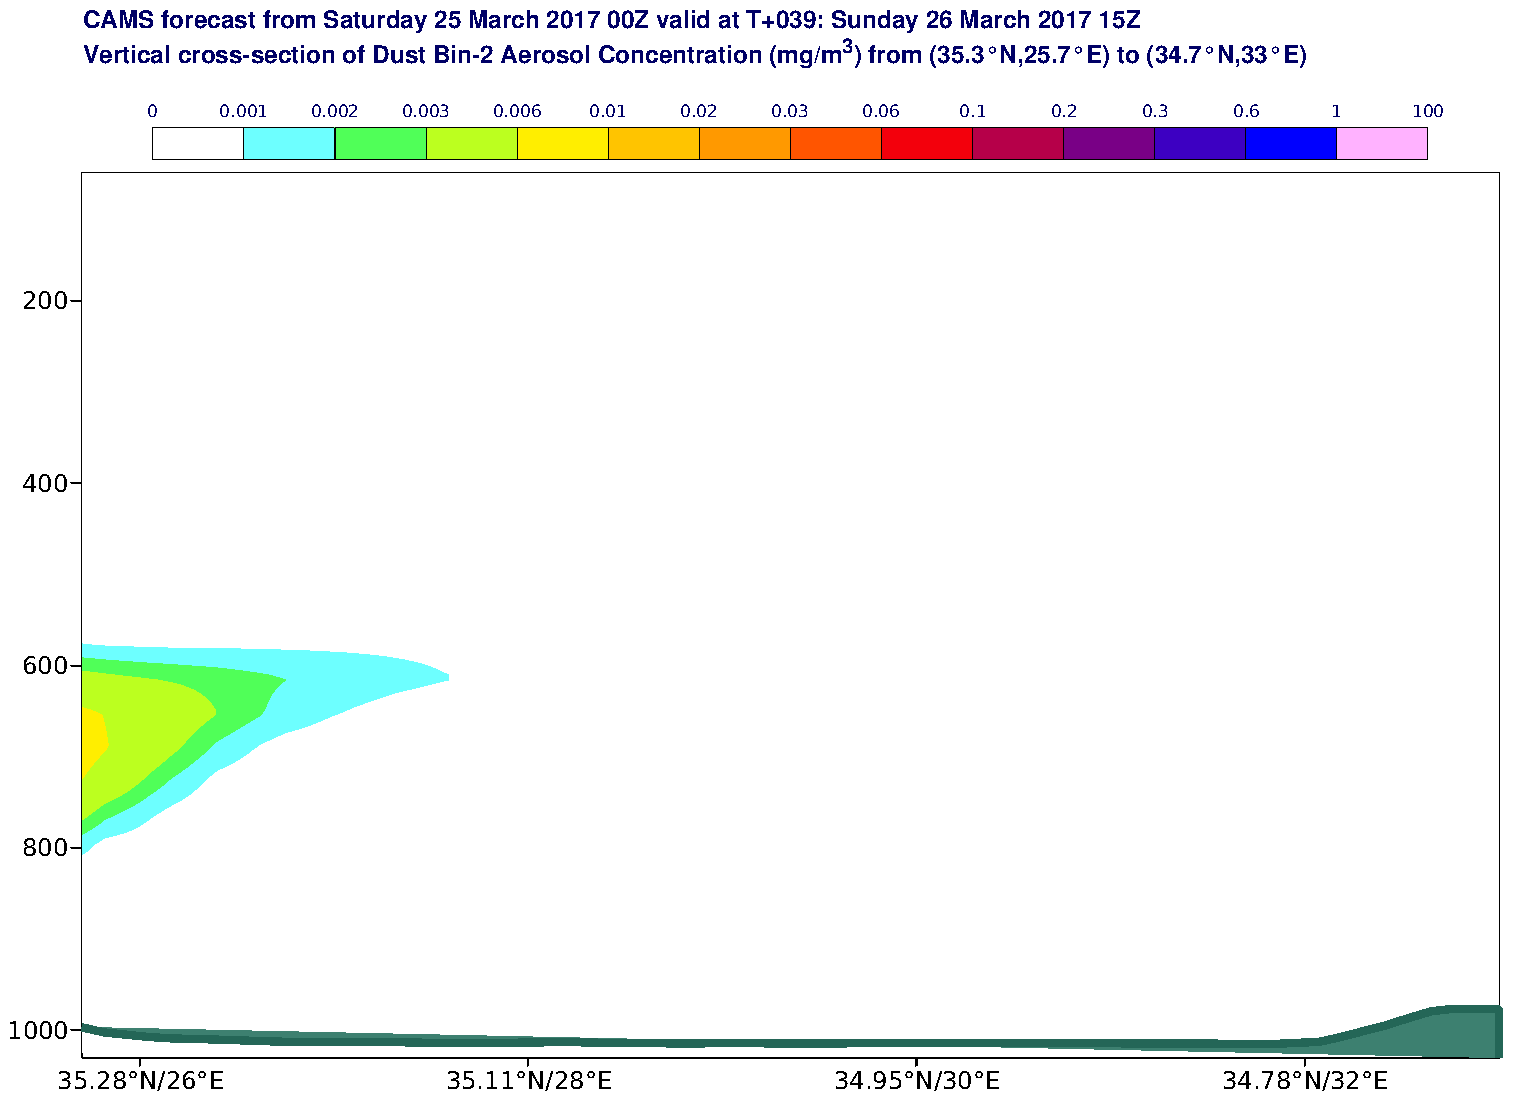 Vertical cross-section of Dust Bin-2 Aerosol Concentration (mg/m3) valid at T39 - 2017-03-26 15:00